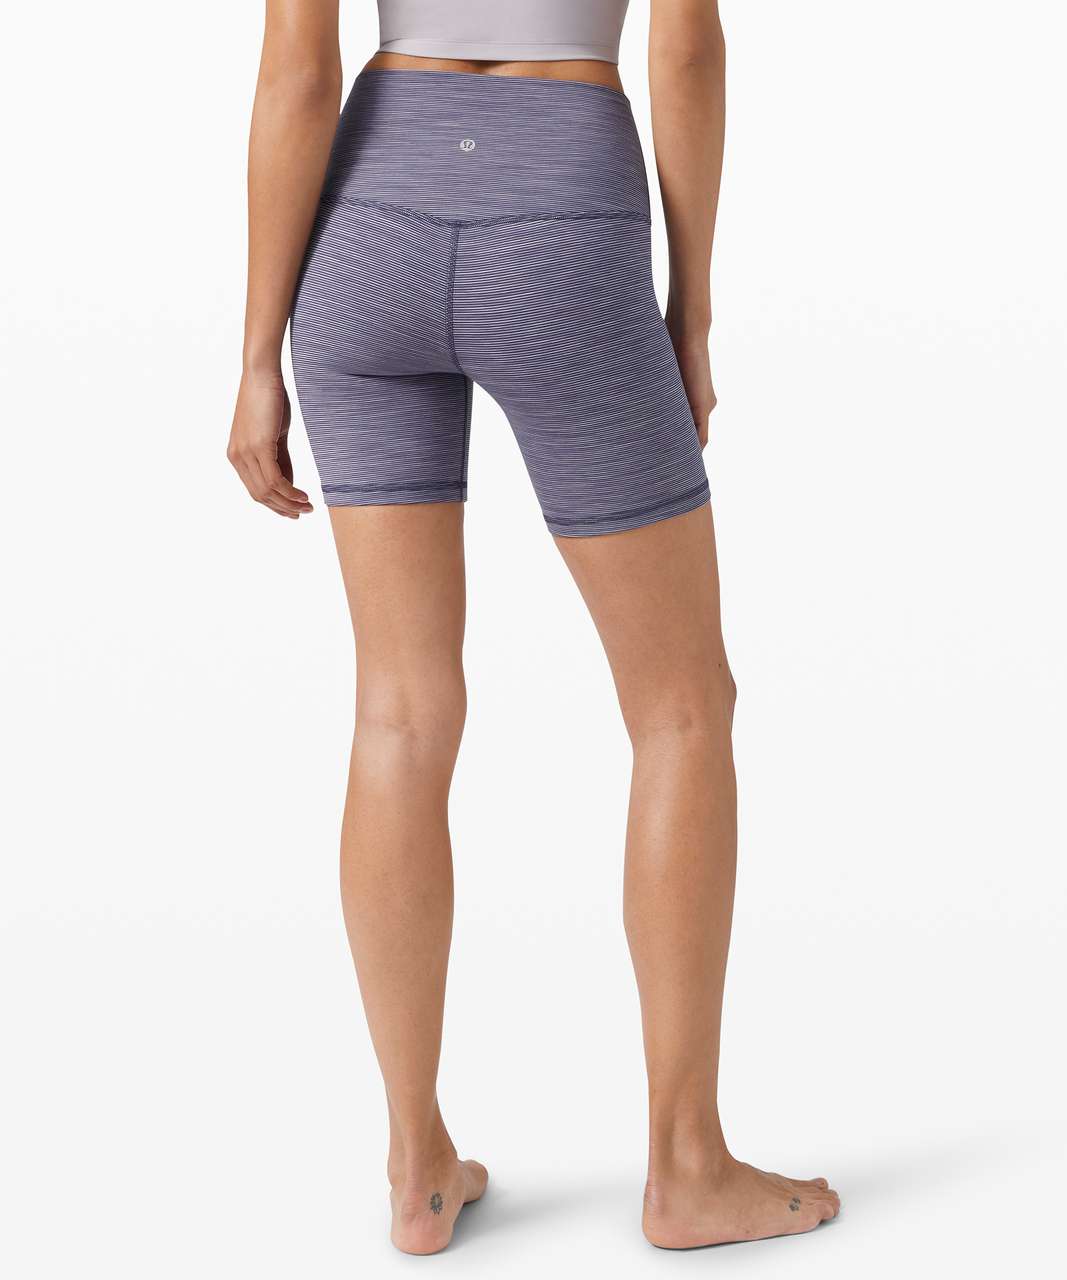 Lululemon Align Short *6" - Wee Are From Space Greyvy Persian Violet